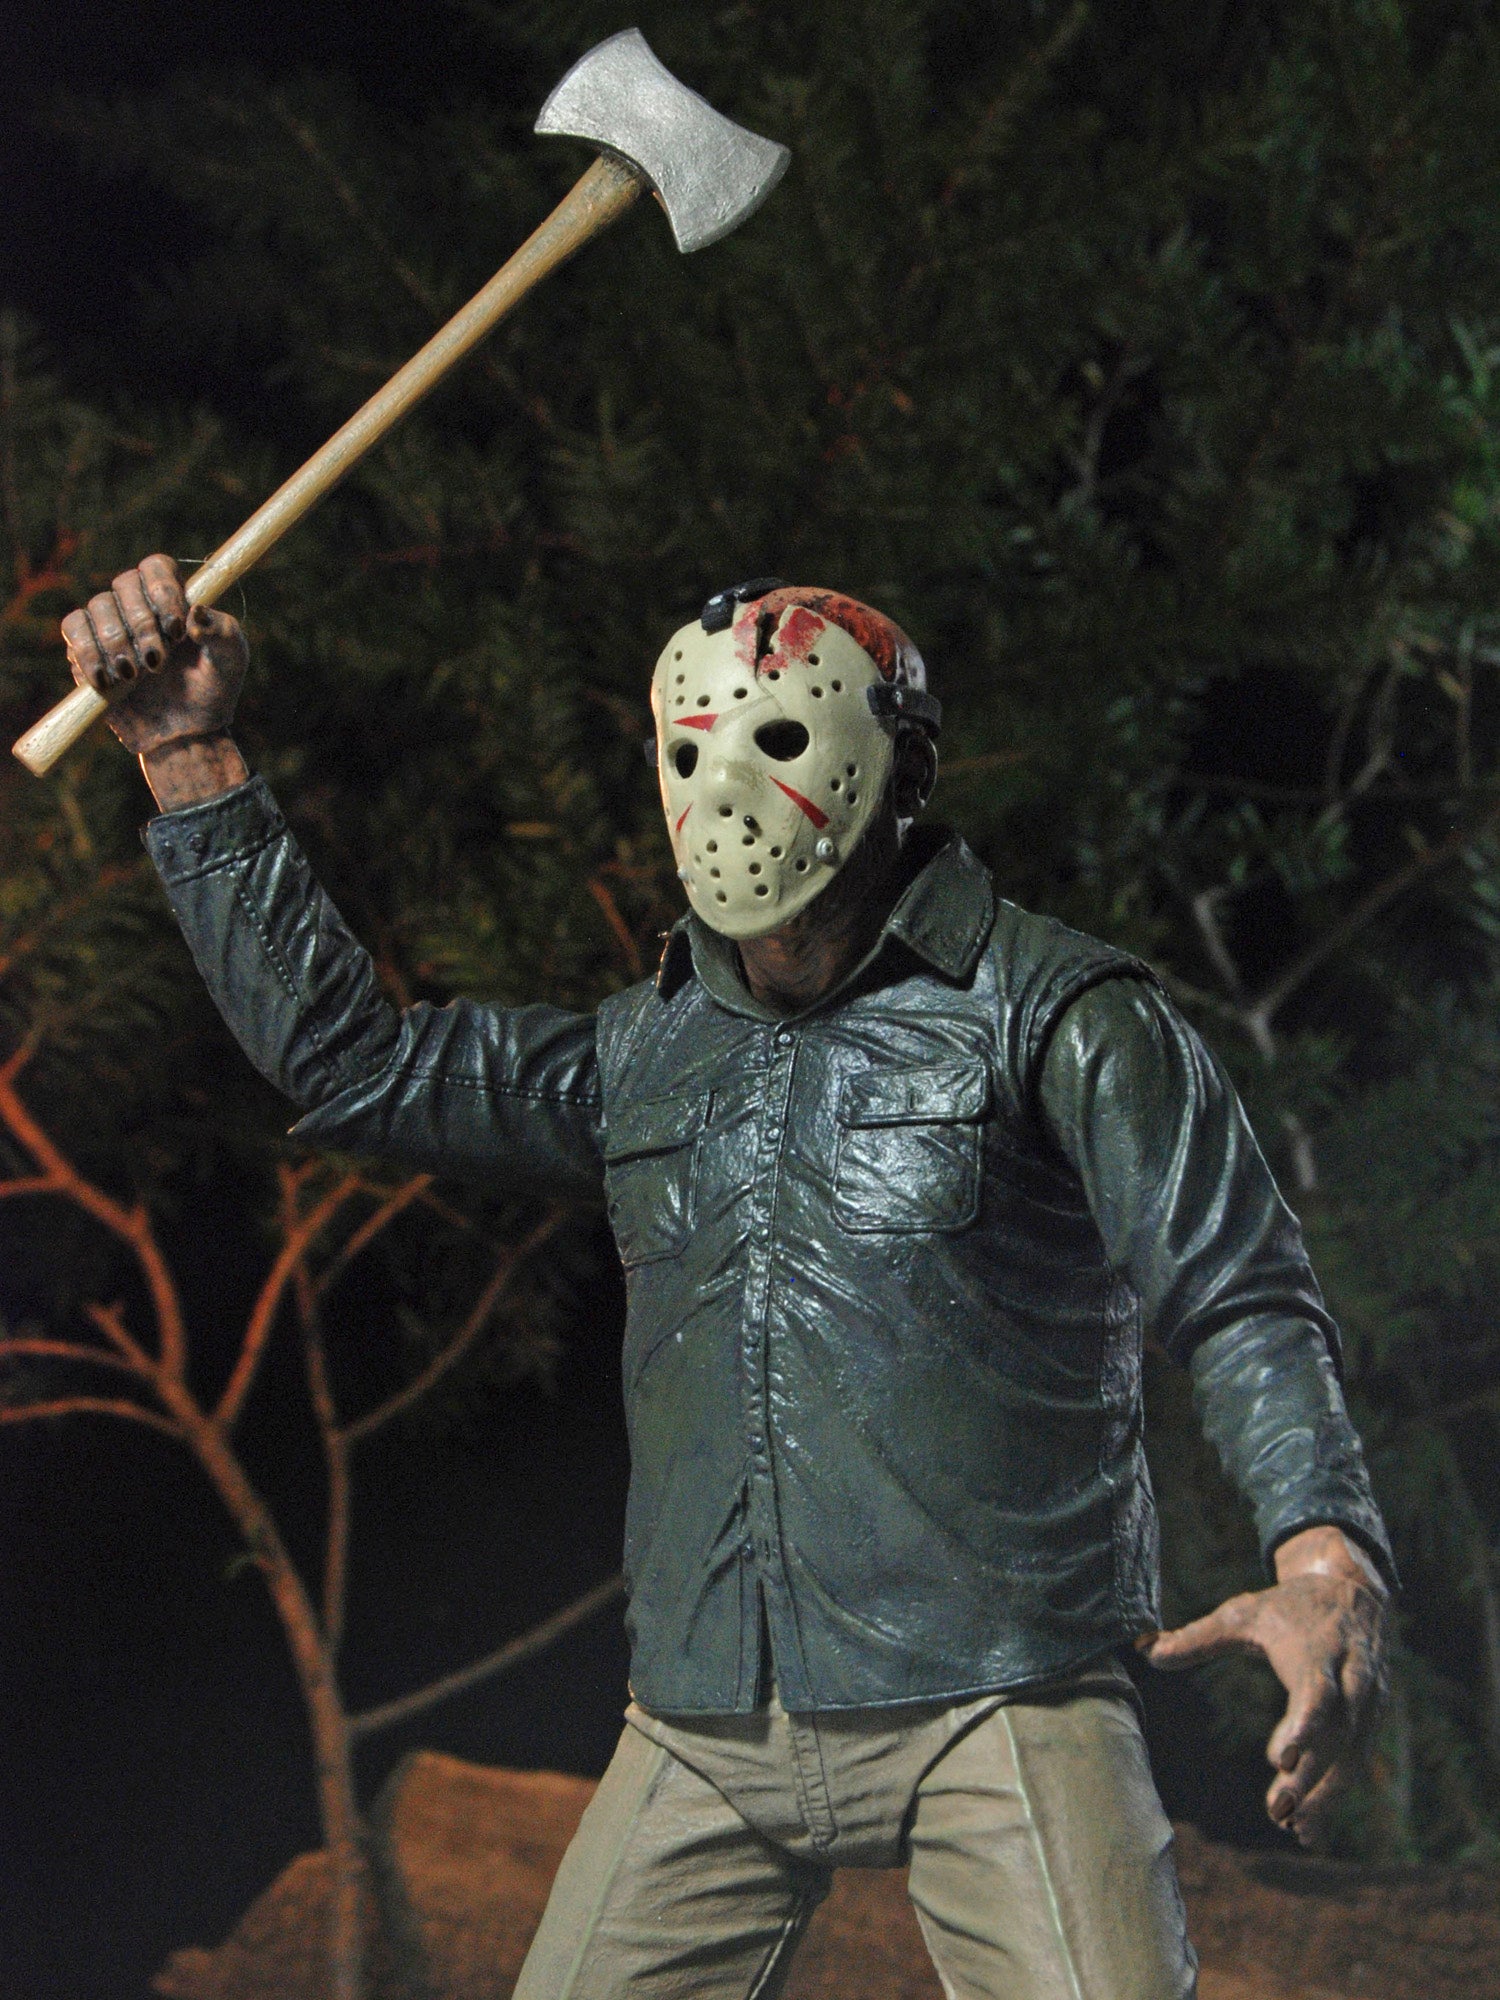 NECA - Friday the 13th - 7" Action Figure - Ultimate Part 4 Jason - costumes.com